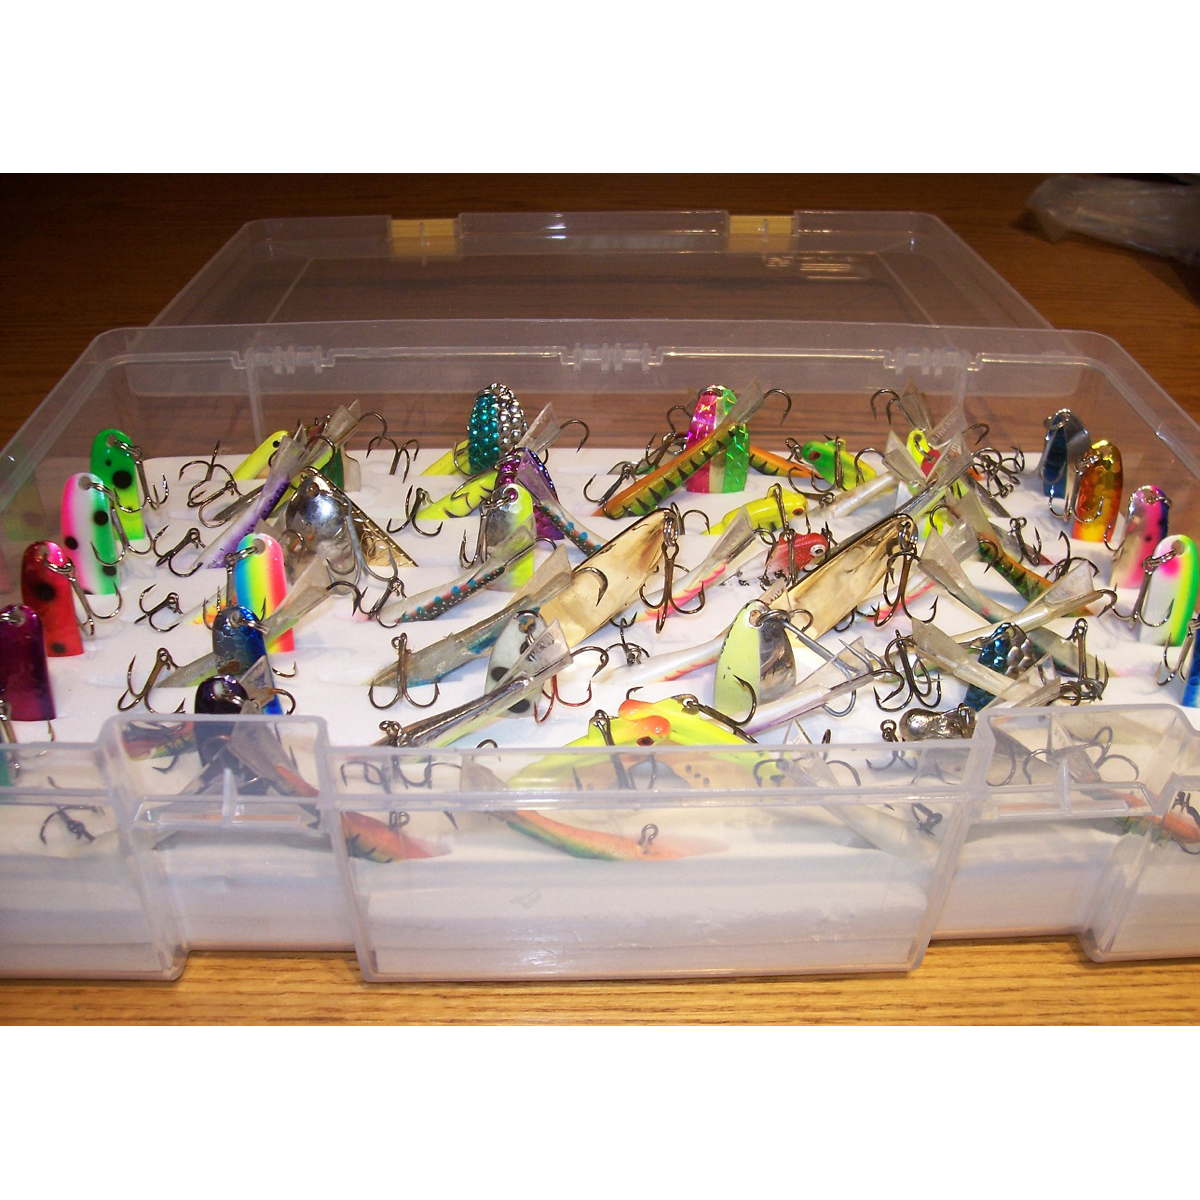 Photo of Kittrick Amish Ice Jigging Rapala and Spoon Caddy for sale at United Tackle Shops.